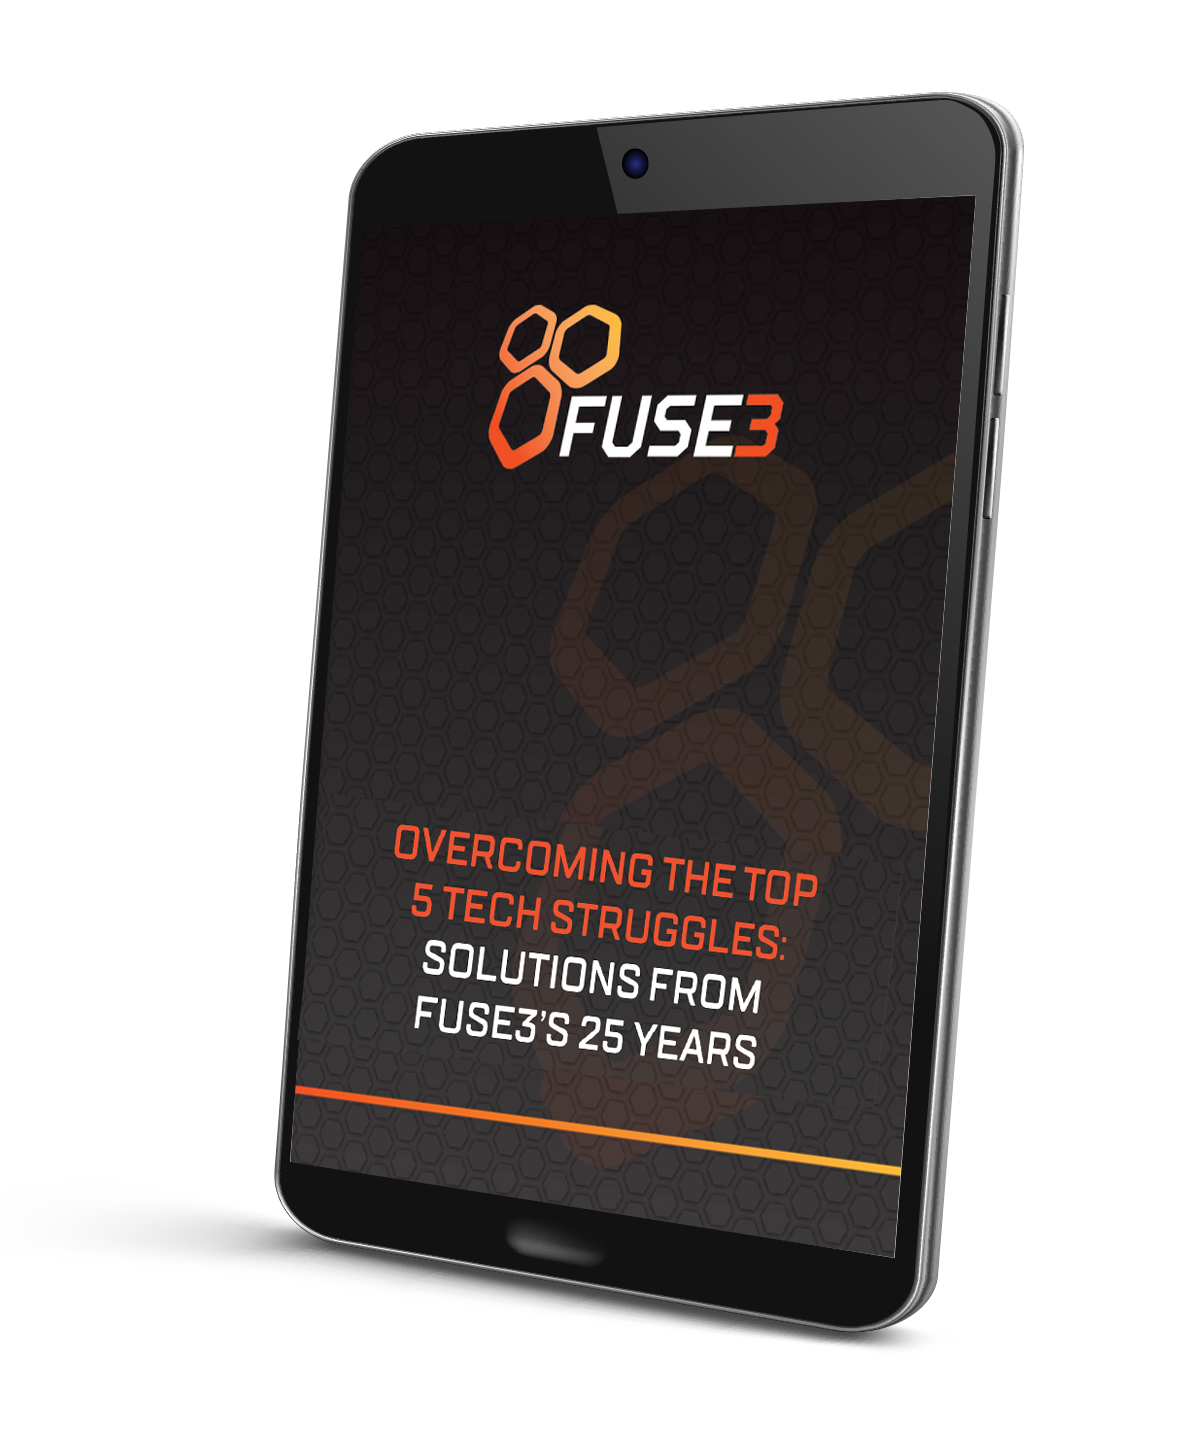 OVERCOMING THE TOP 5 TECH STRUGGLES: SOLUTIONS FROM FUSE3'S 25 YEARS